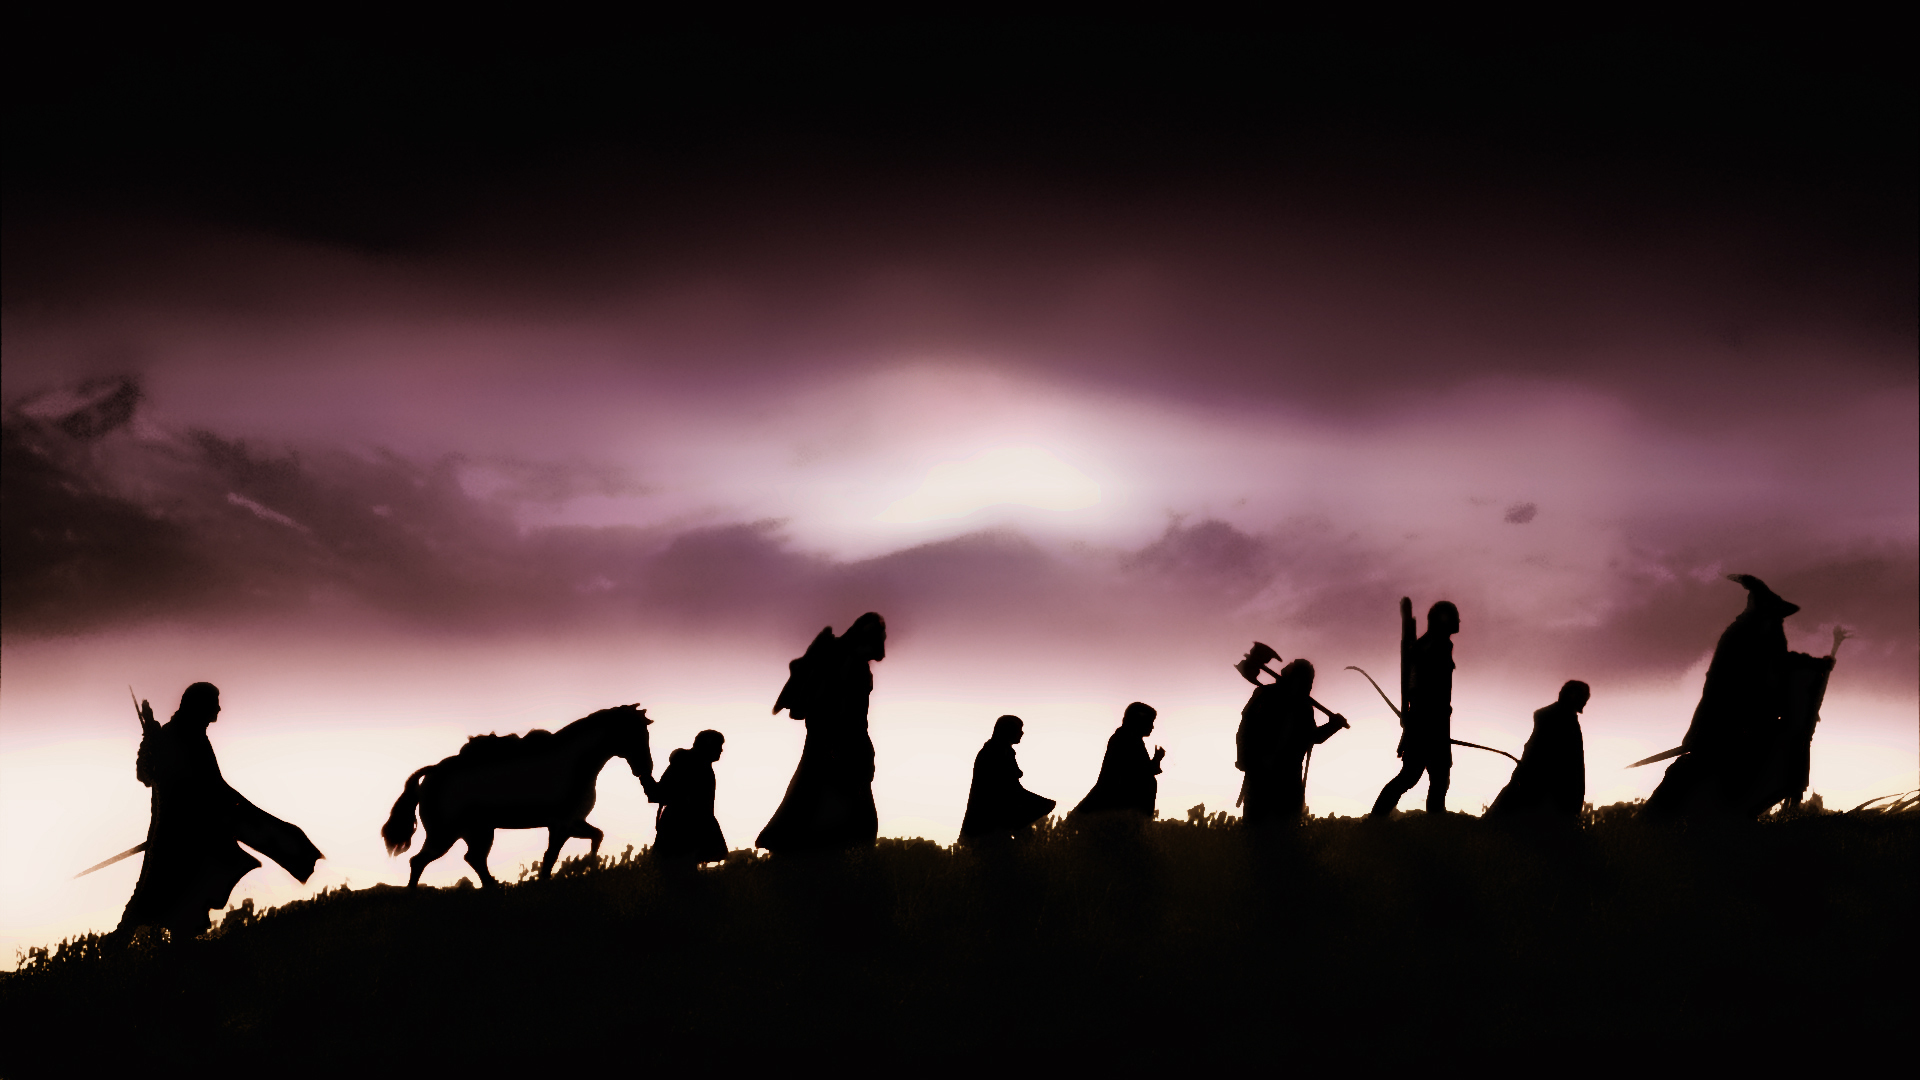 tolkien fellowship of the ring